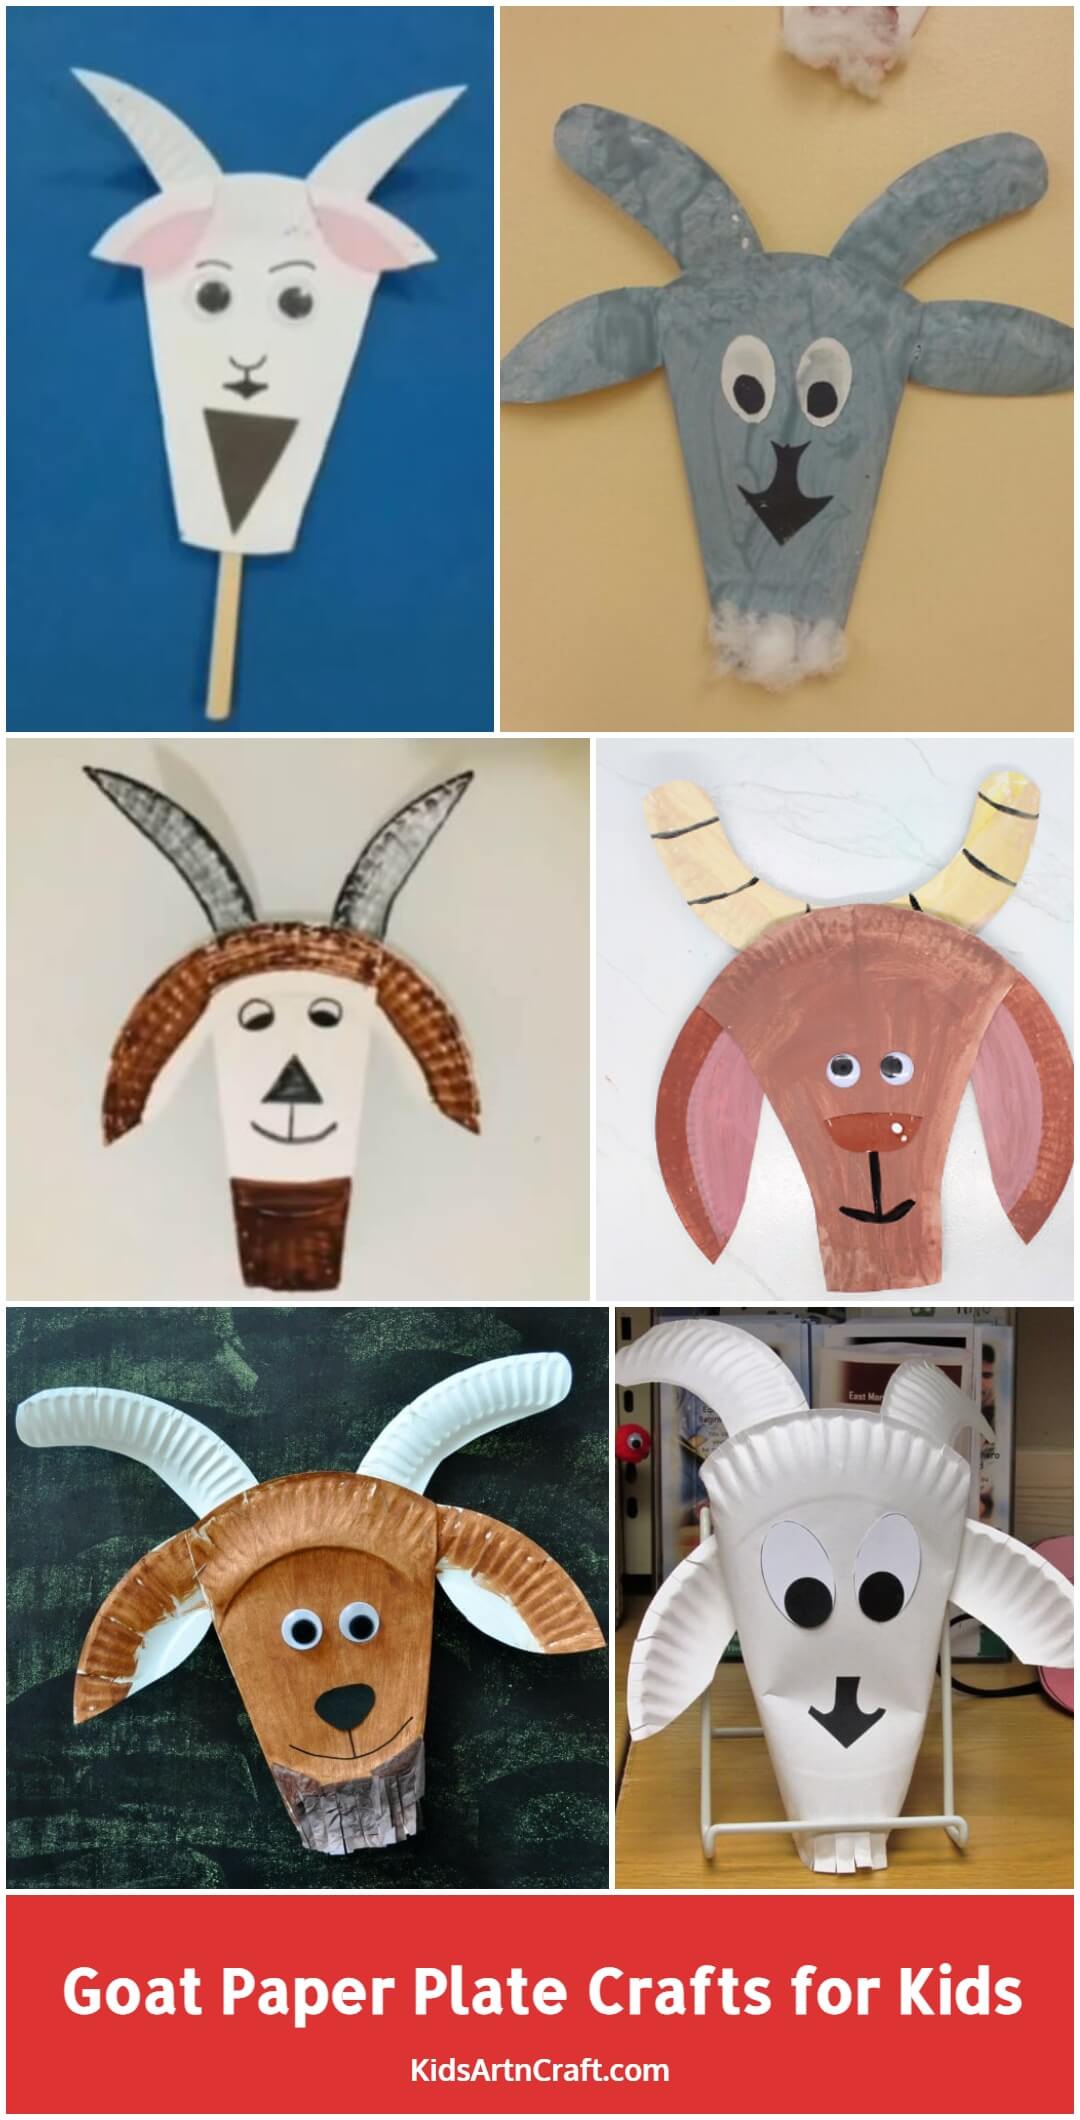 Goat Paper Plate Crafts for Kids